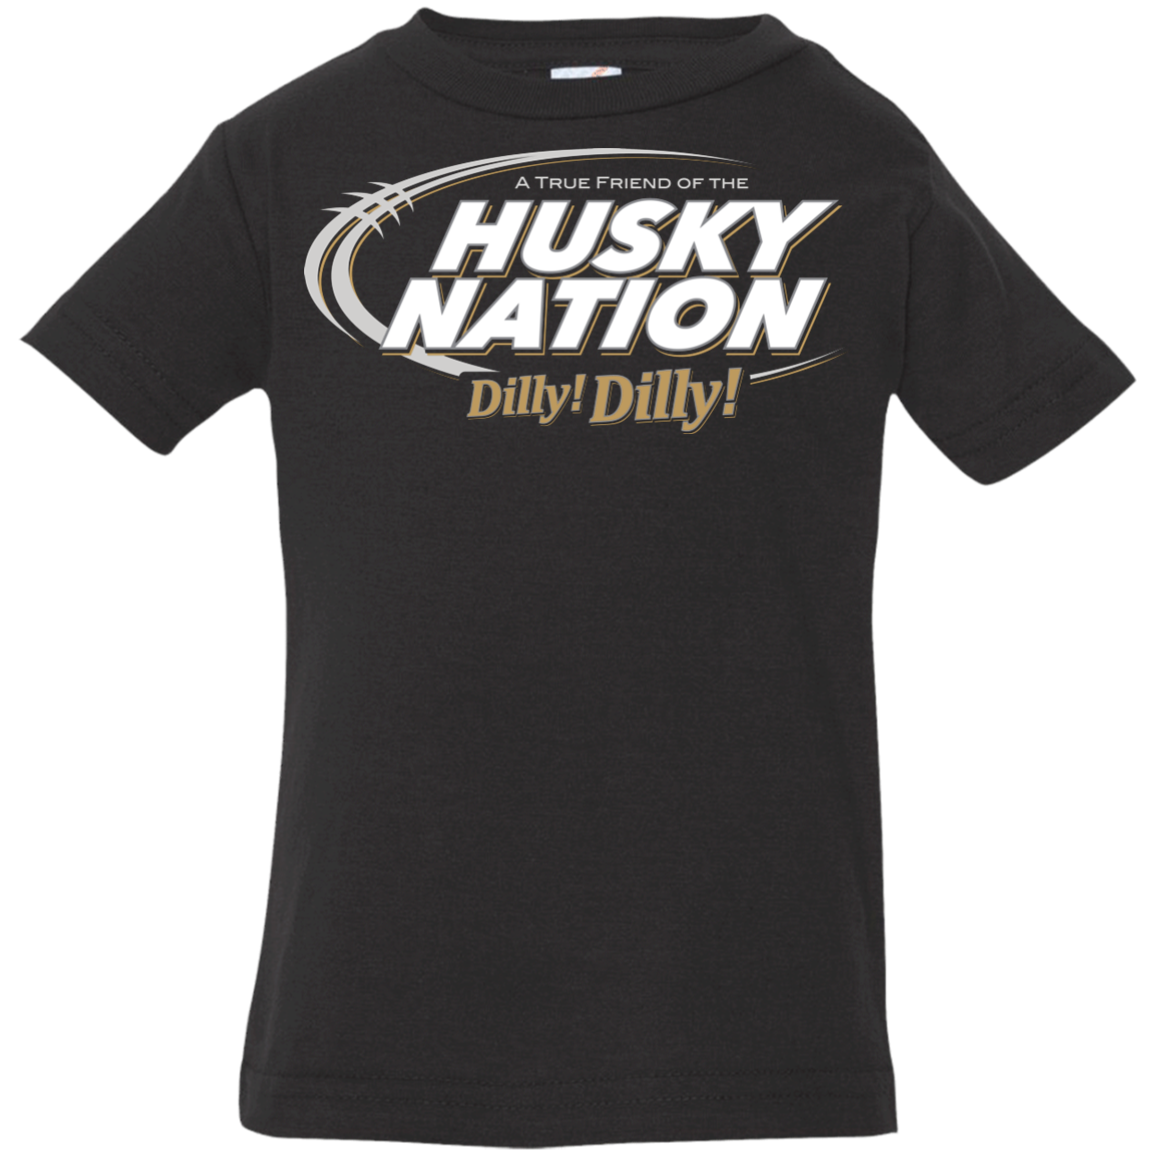 Washington Dilly Dilly Infant Premium T-Shirt